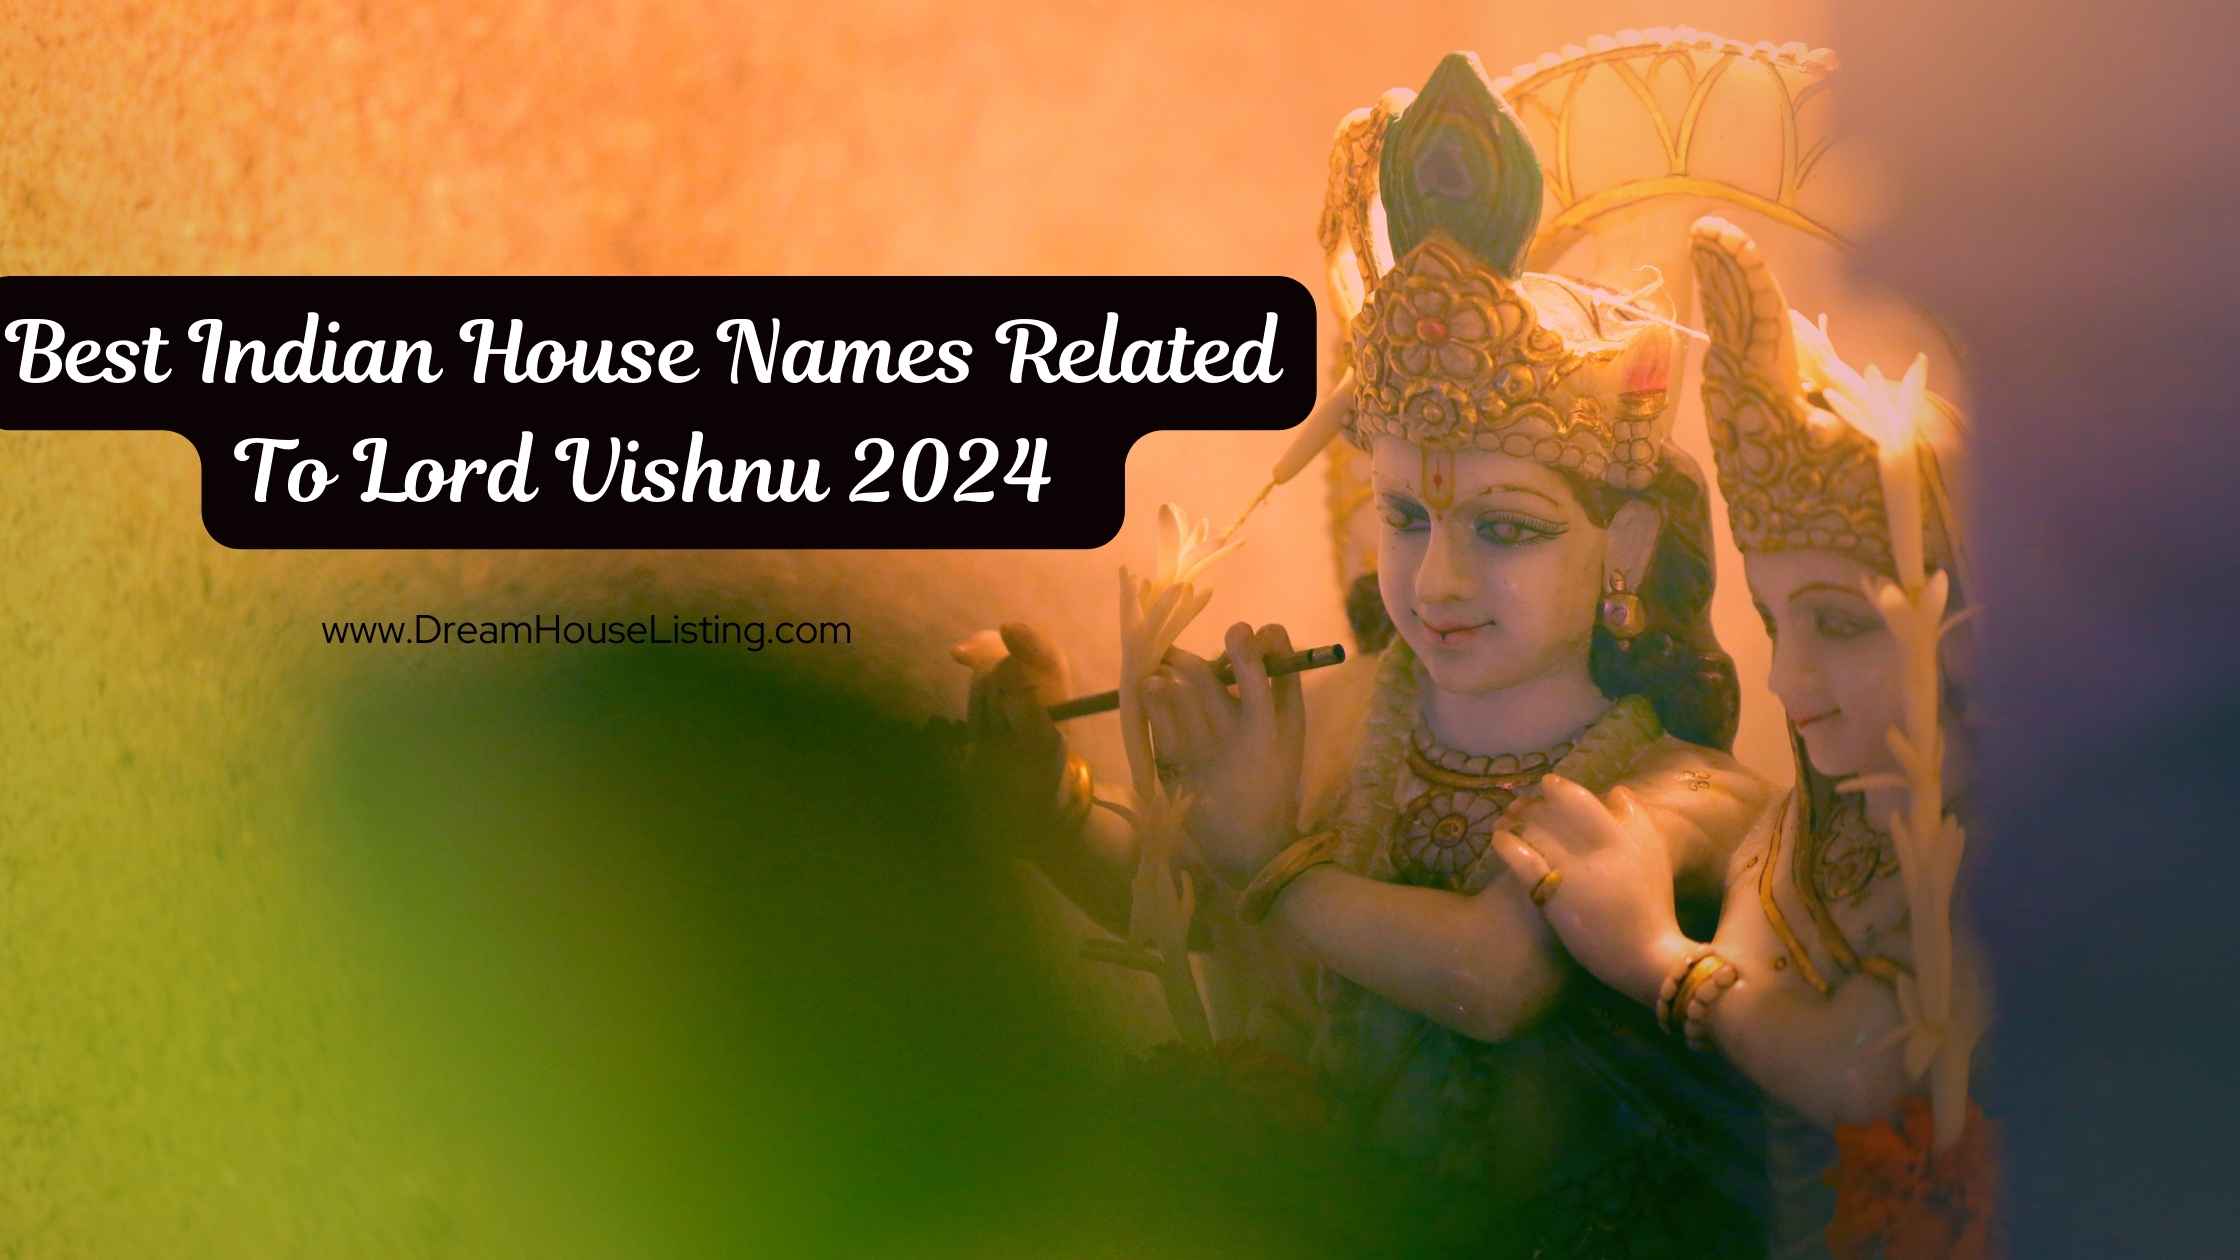 Best Indian House Names Related To Lord Vishnu 2024 - Dream House Listing